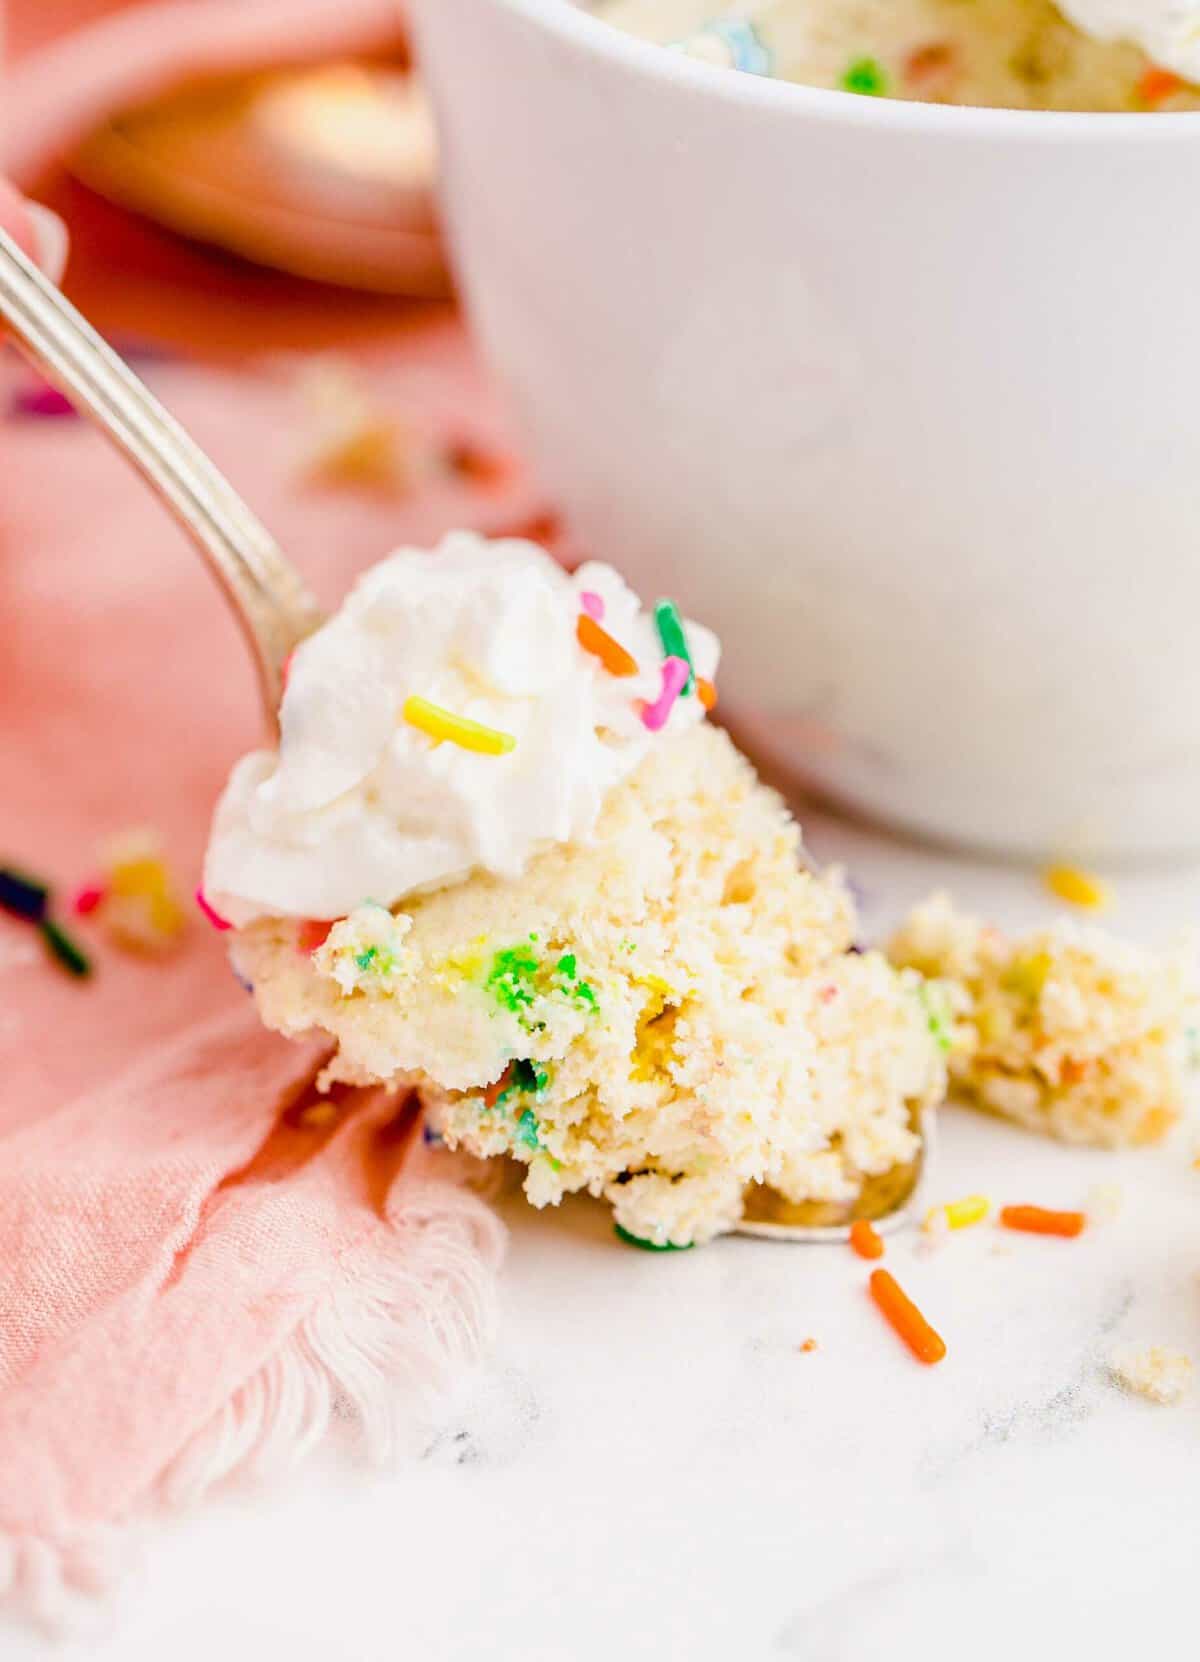 Spoonful of funfetti mug cake topped with whipped cream and sprinkles